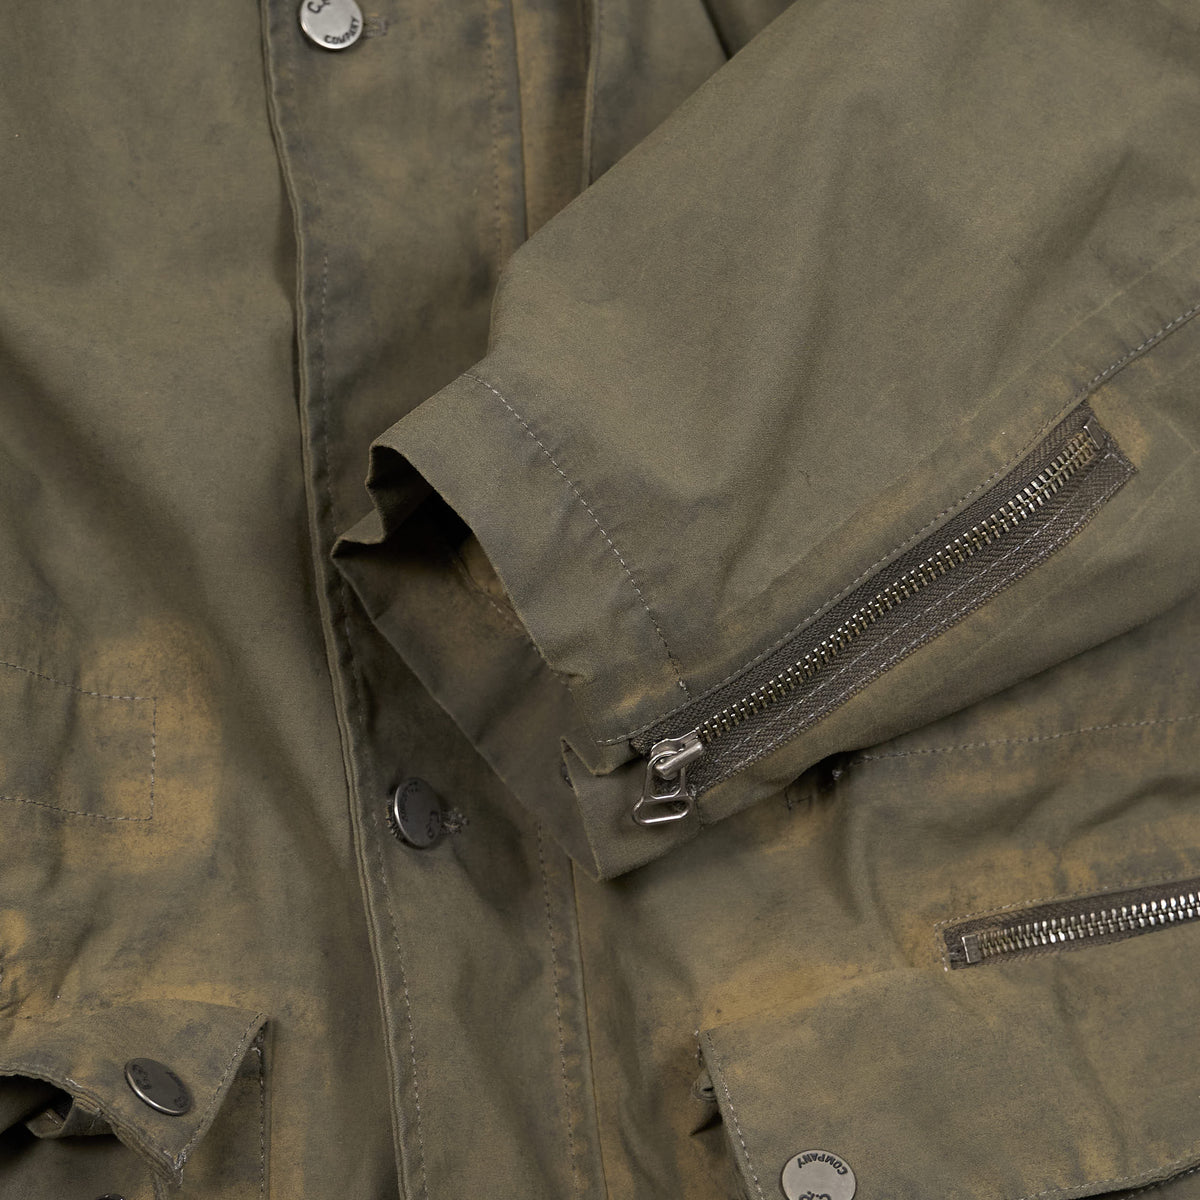 C.P. Company Goggle Gore-Tex Jacket Designed by Aitor Throup